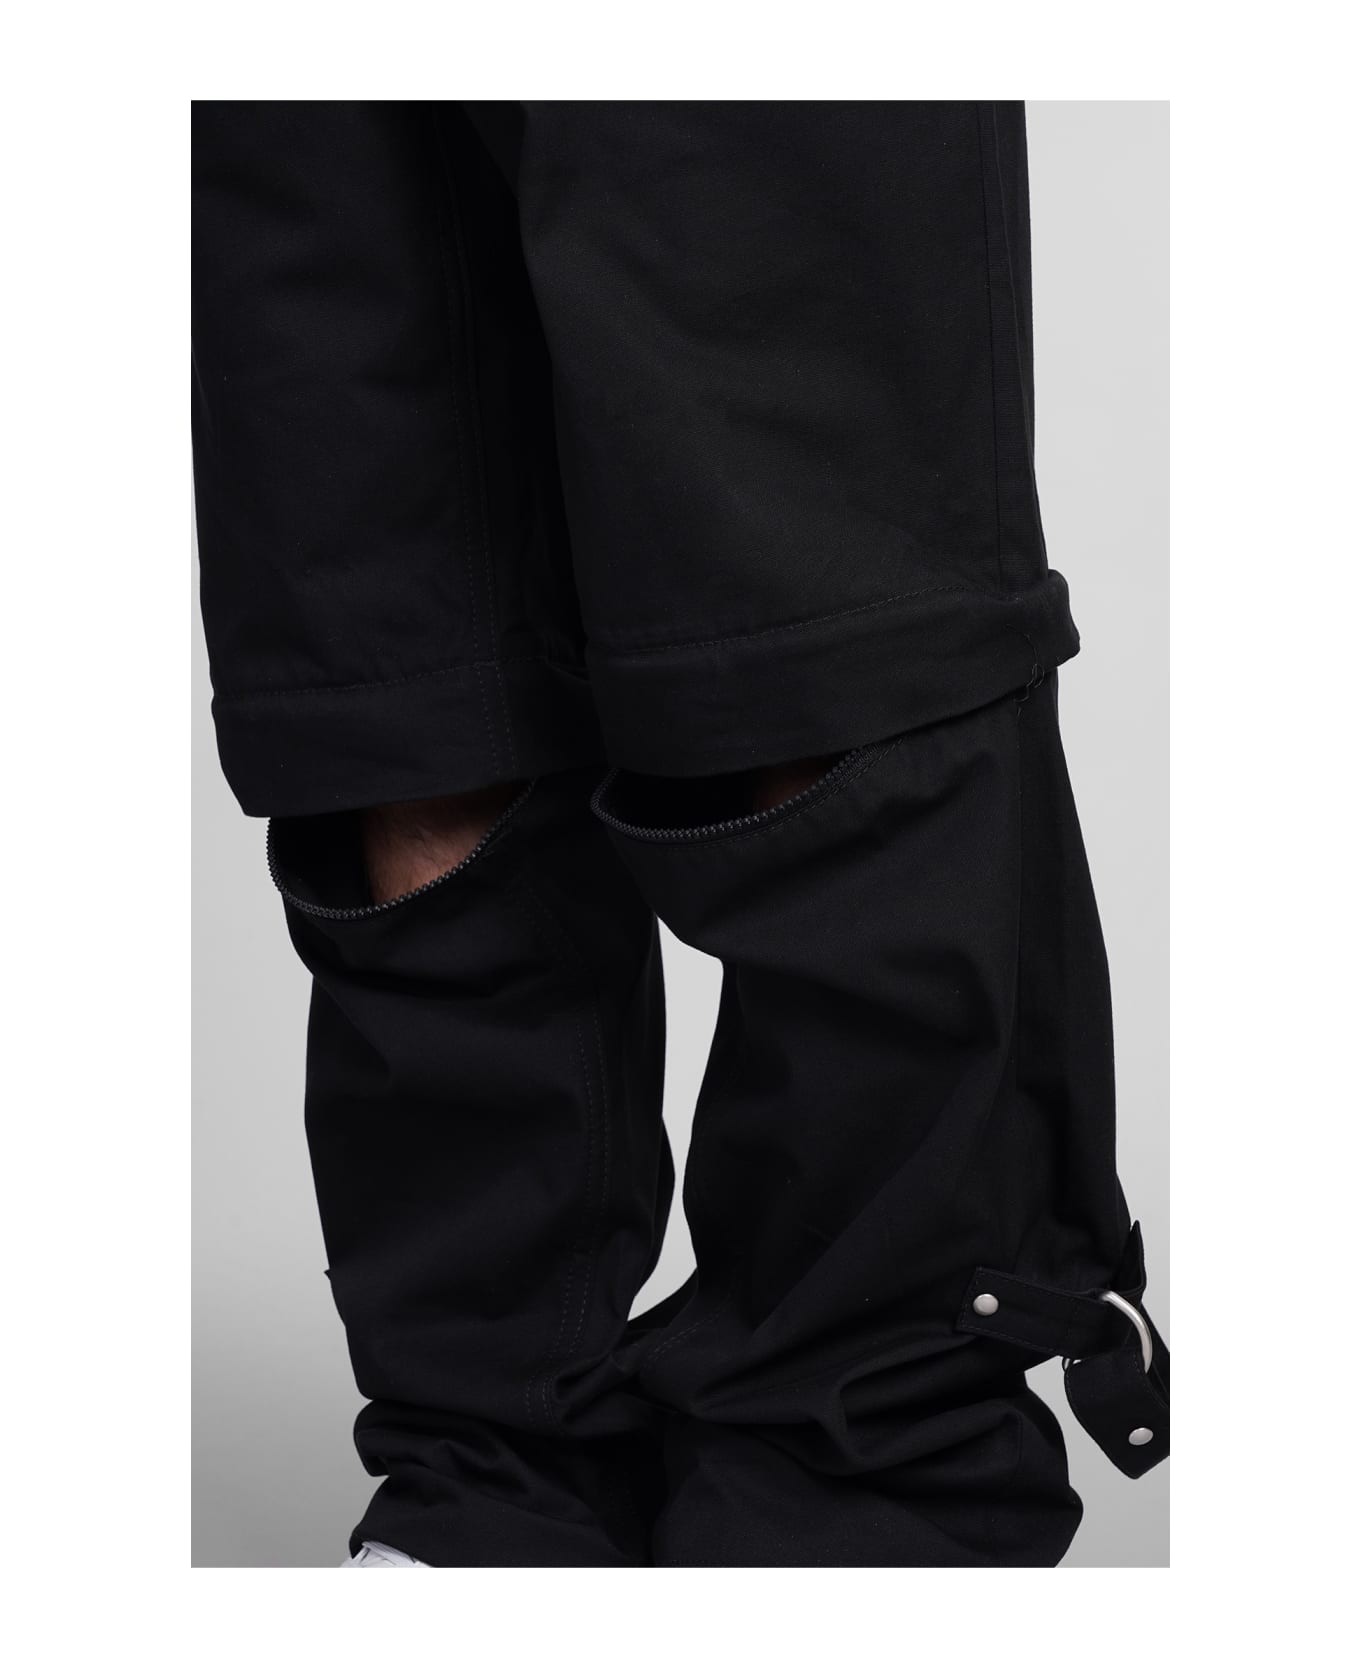 Givenchy inserti Pants In Black Cotton - black